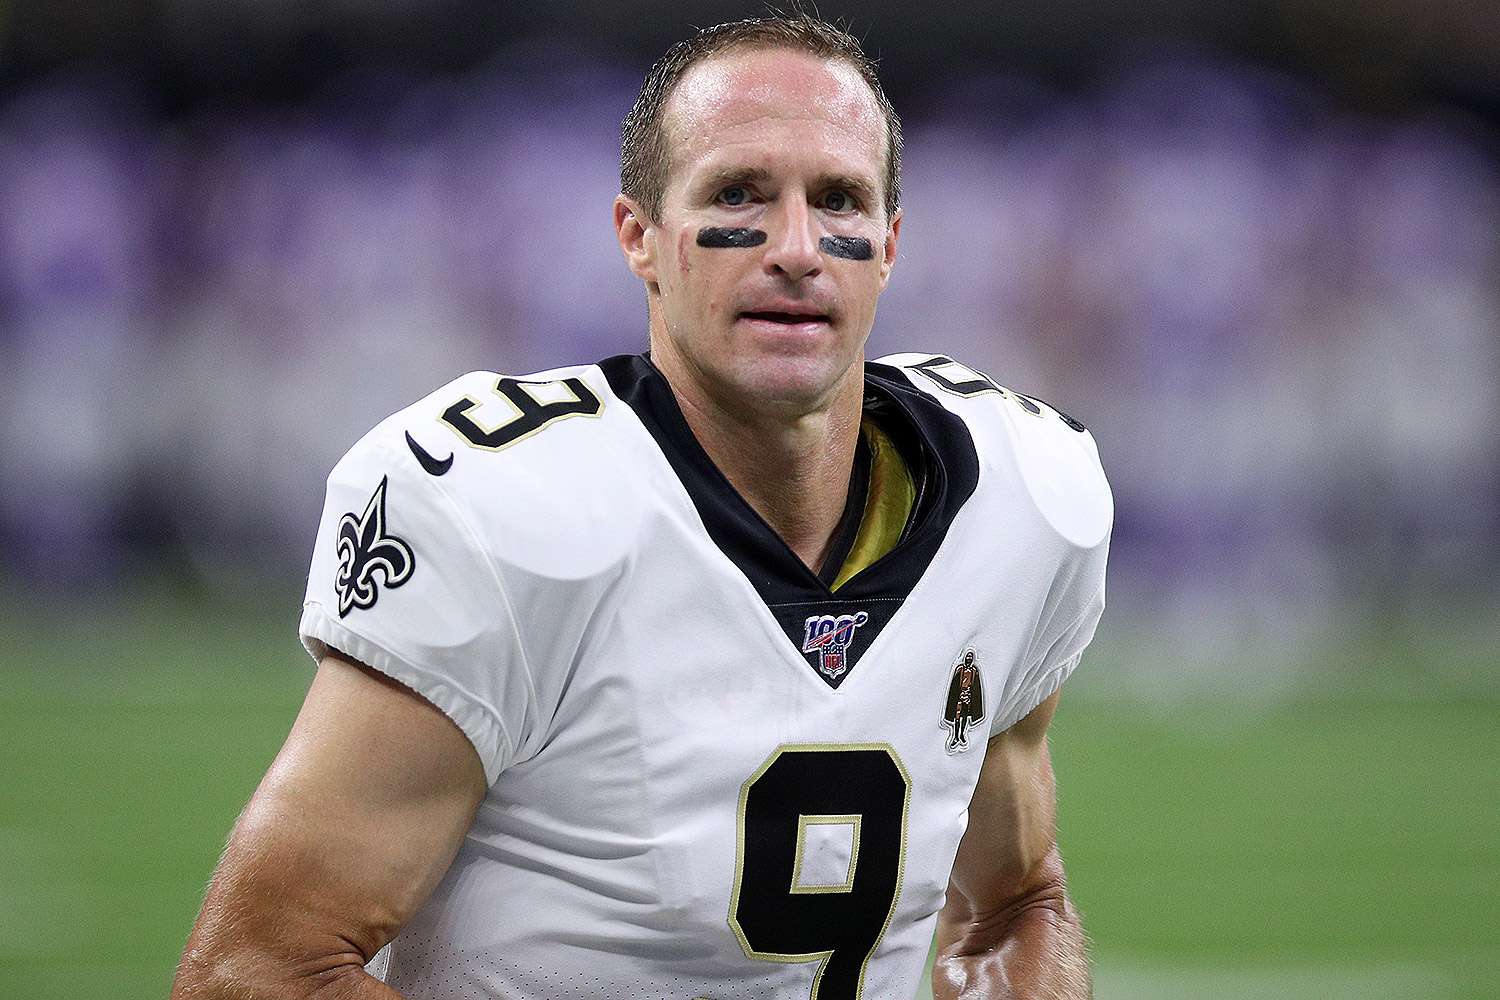 Drew Brees Says His Future Is Undecided | PEOPLE.com